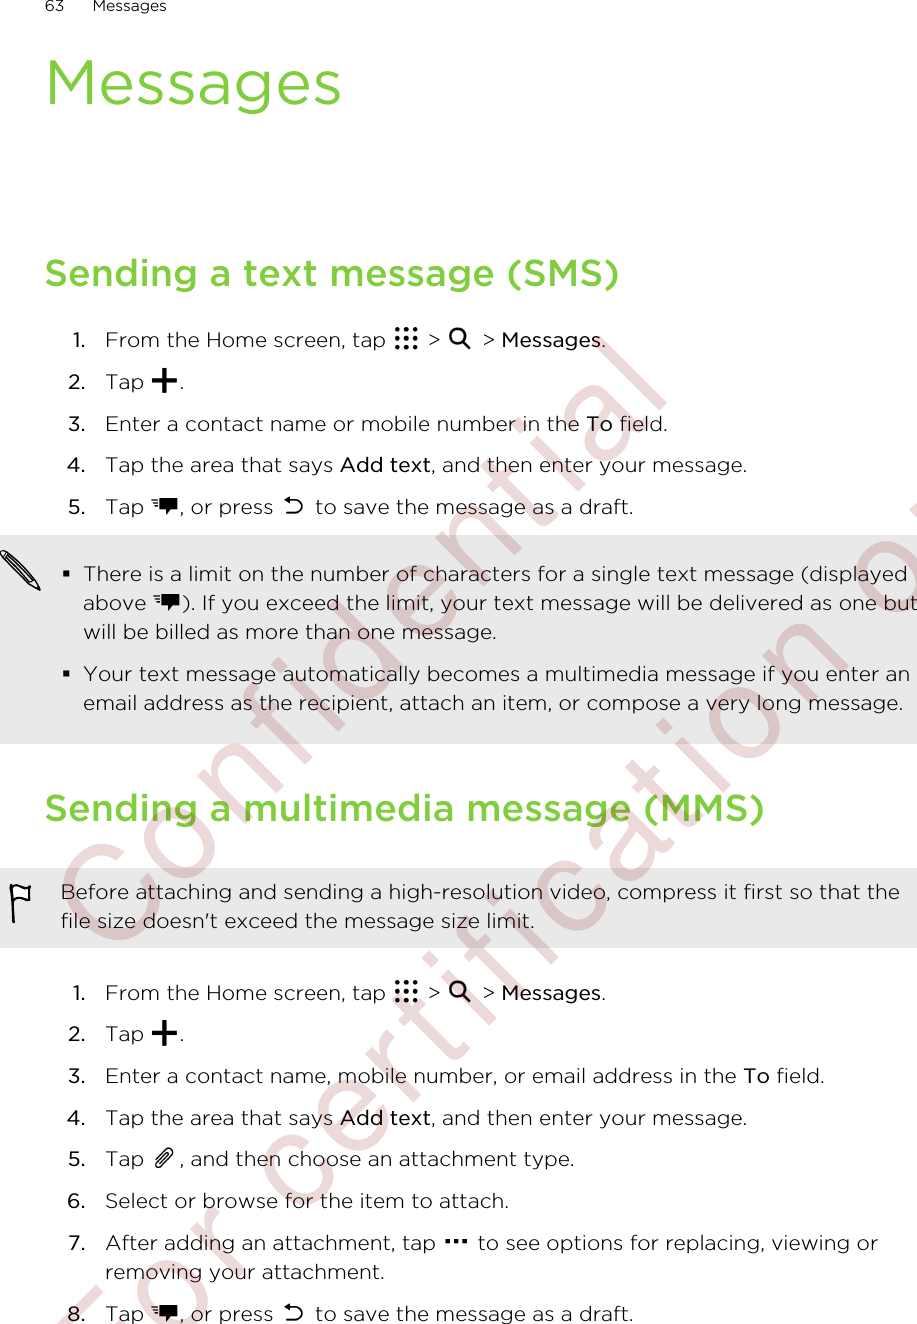 MessagesSending a text message (SMS)1. From the Home screen, tap   &gt;   &gt; Messages.2. Tap  .3. Enter a contact name or mobile number in the To field.4. Tap the area that says Add text, and then enter your message.5. Tap  , or press   to save the message as a draft. §There is a limit on the number of characters for a single text message (displayedabove  ). If you exceed the limit, your text message will be delivered as one butwill be billed as more than one message.§Your text message automatically becomes a multimedia message if you enter anemail address as the recipient, attach an item, or compose a very long message.Sending a multimedia message (MMS)Before attaching and sending a high-resolution video, compress it first so that thefile size doesn&apos;t exceed the message size limit.1. From the Home screen, tap   &gt;   &gt; Messages.2. Tap  .3. Enter a contact name, mobile number, or email address in the To field.4. Tap the area that says Add text, and then enter your message.5. Tap  , and then choose an attachment type.6. Select or browse for the item to attach.7. After adding an attachment, tap   to see options for replacing, viewing orremoving your attachment.8. Tap  , or press   to save the message as a draft.63 Messages        Confident ial  For cert ificat ion only